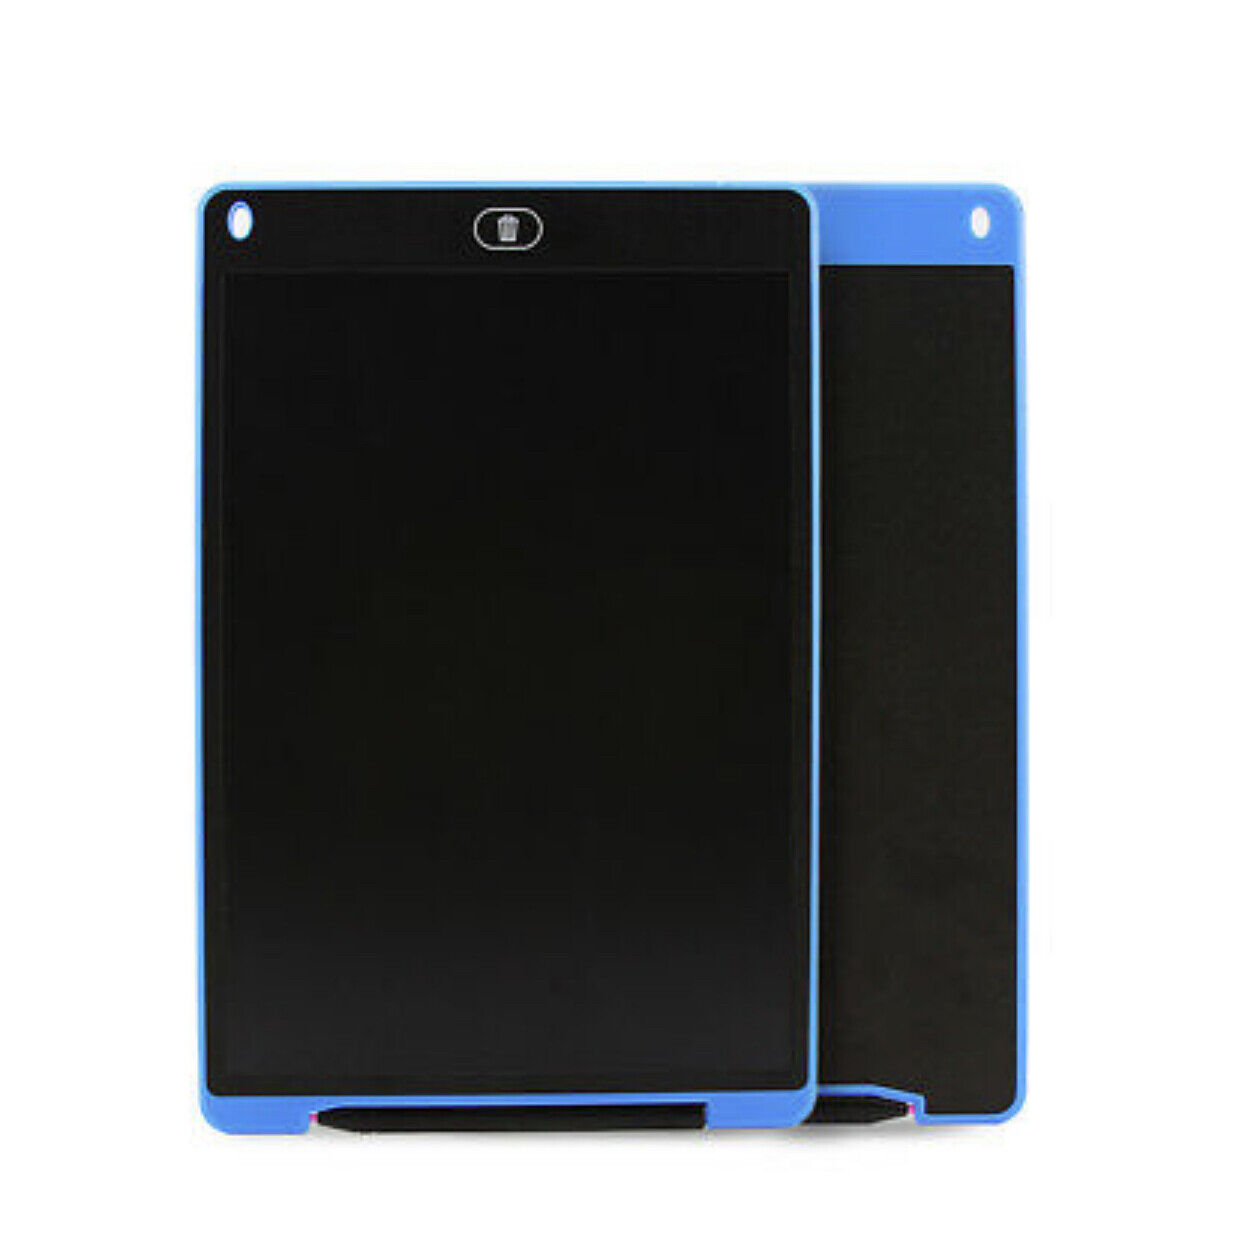 8.5/12 inch Portable LCD Writing Tablet Electronic Drawing Board One Click Erase